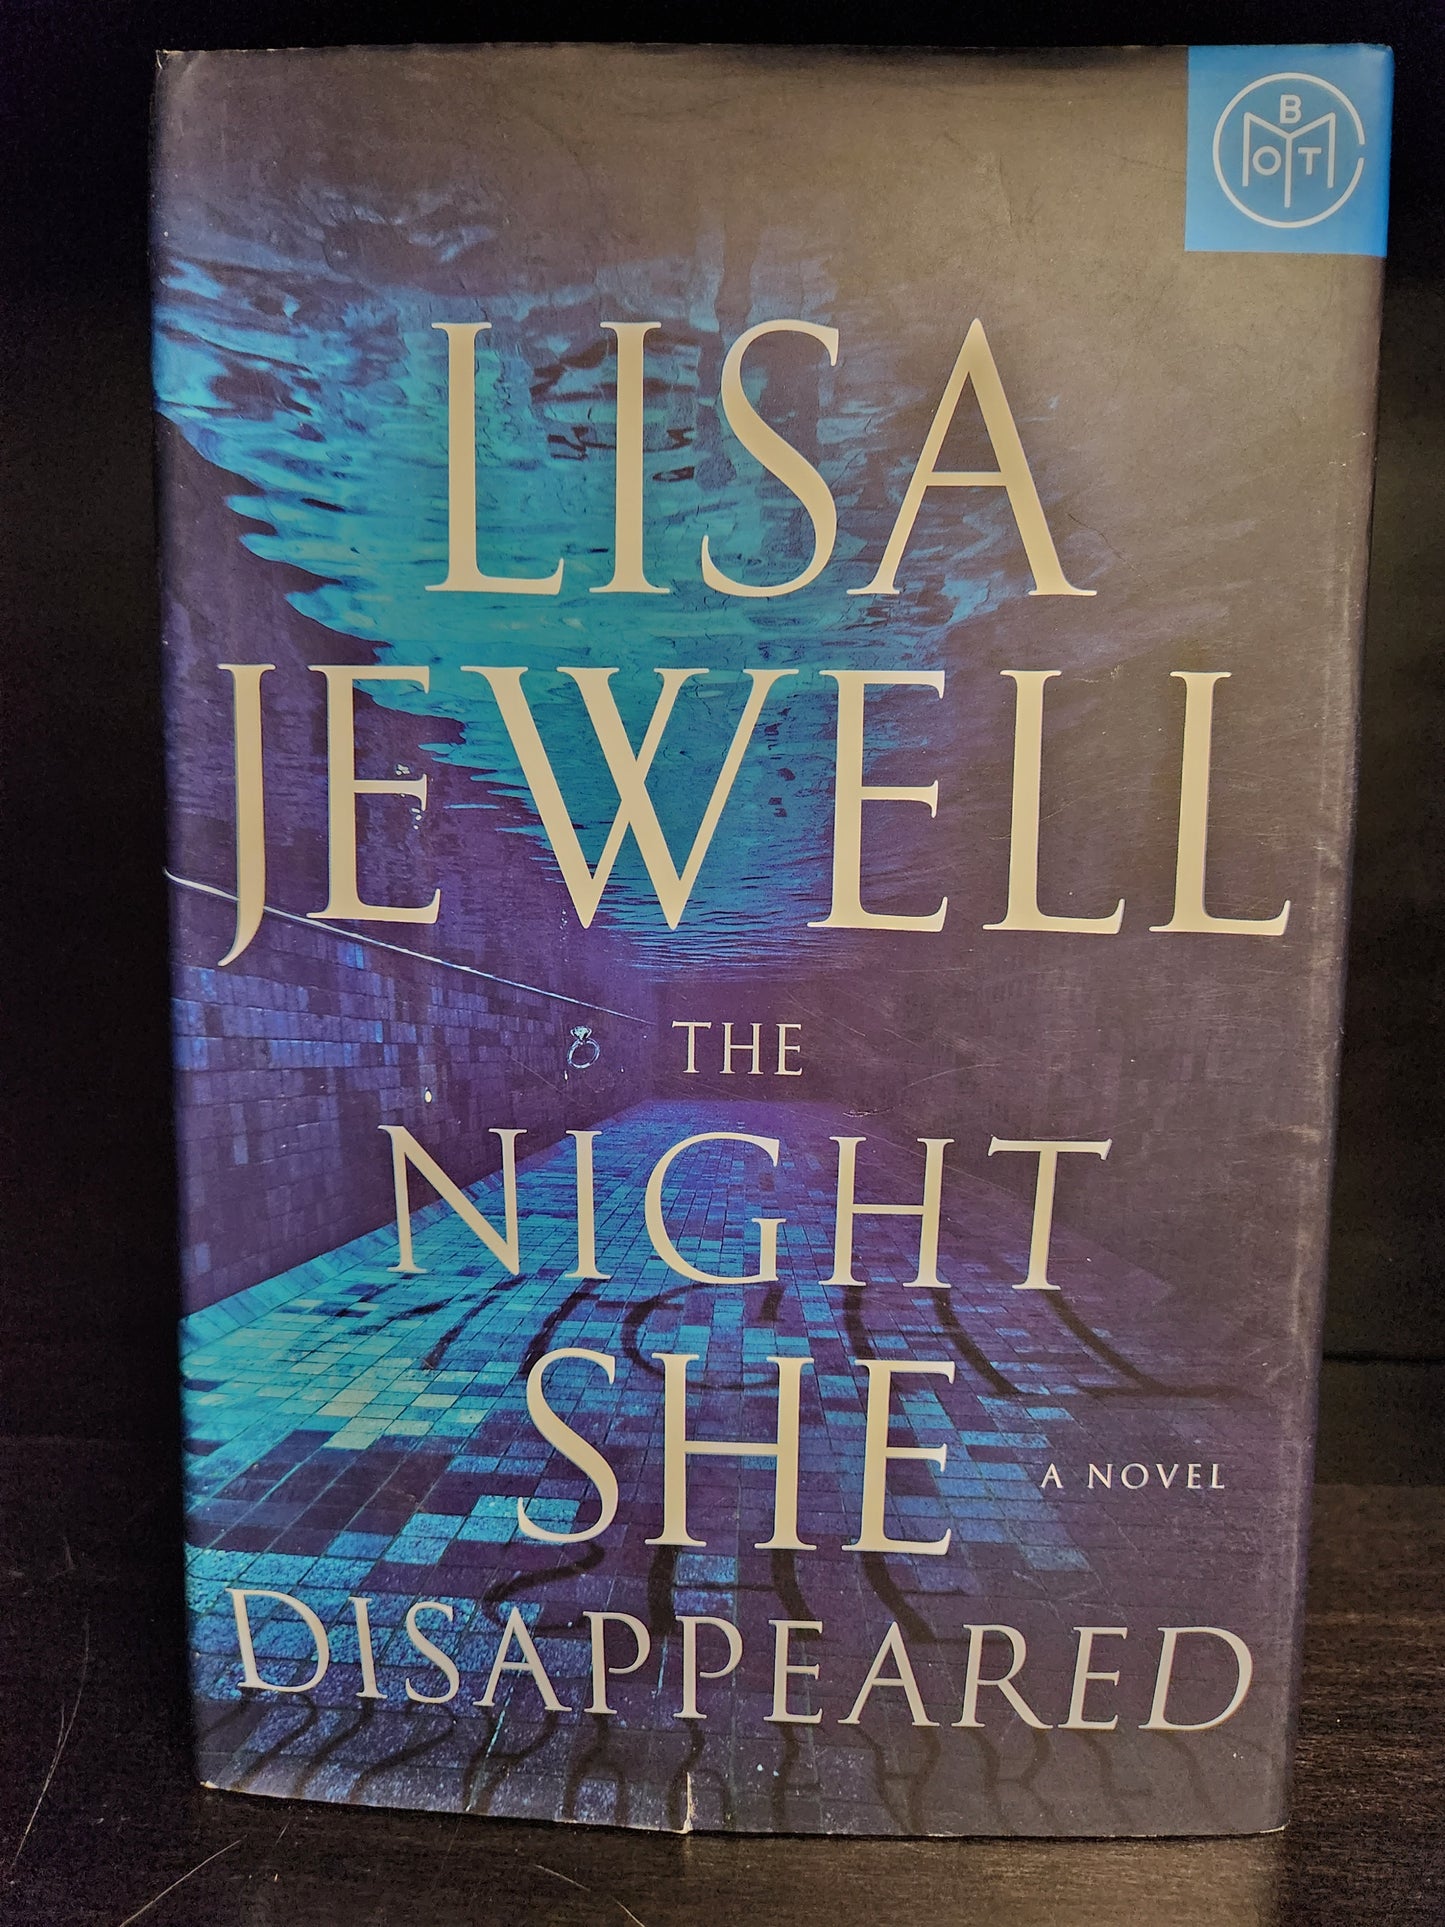 "The Night She Disappeared" by Lisa Jewell